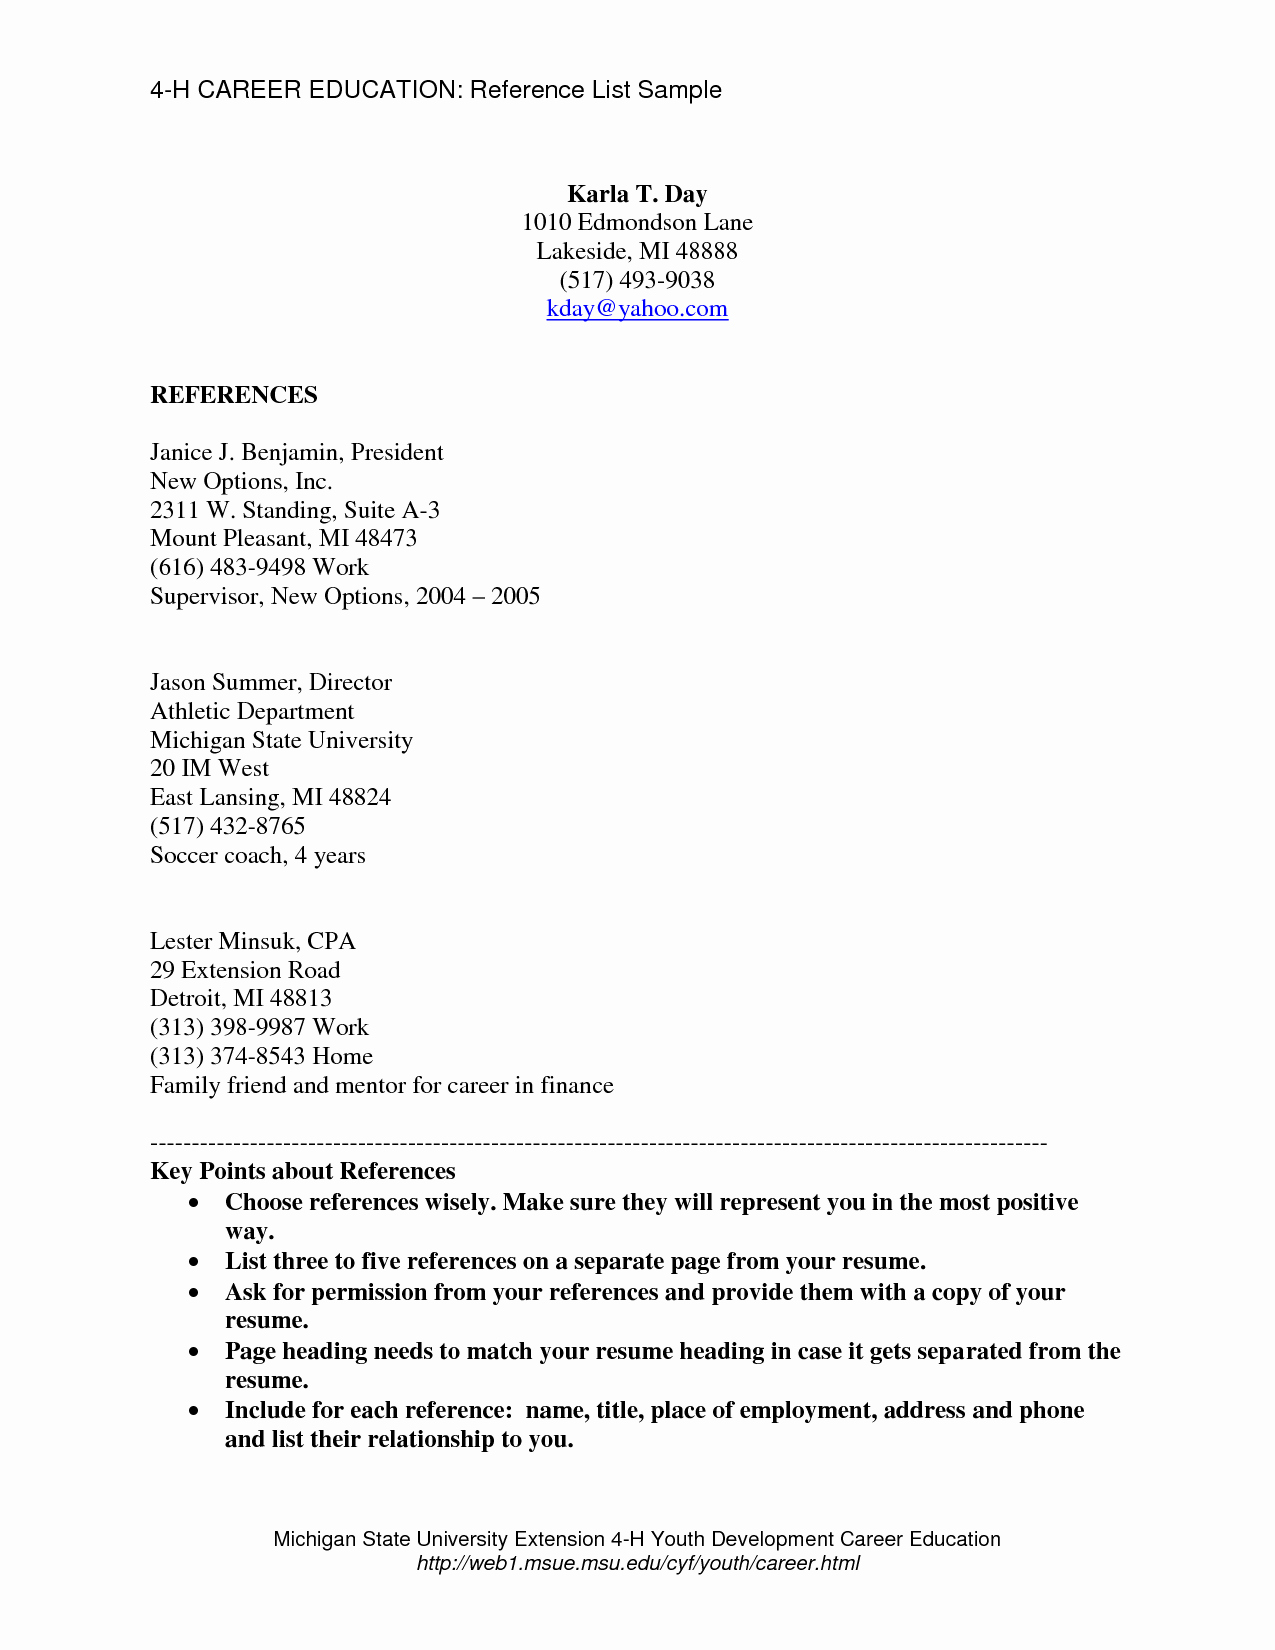 Listing References On A Resume Awesome How to List A Reference A Resume Resume Ideas